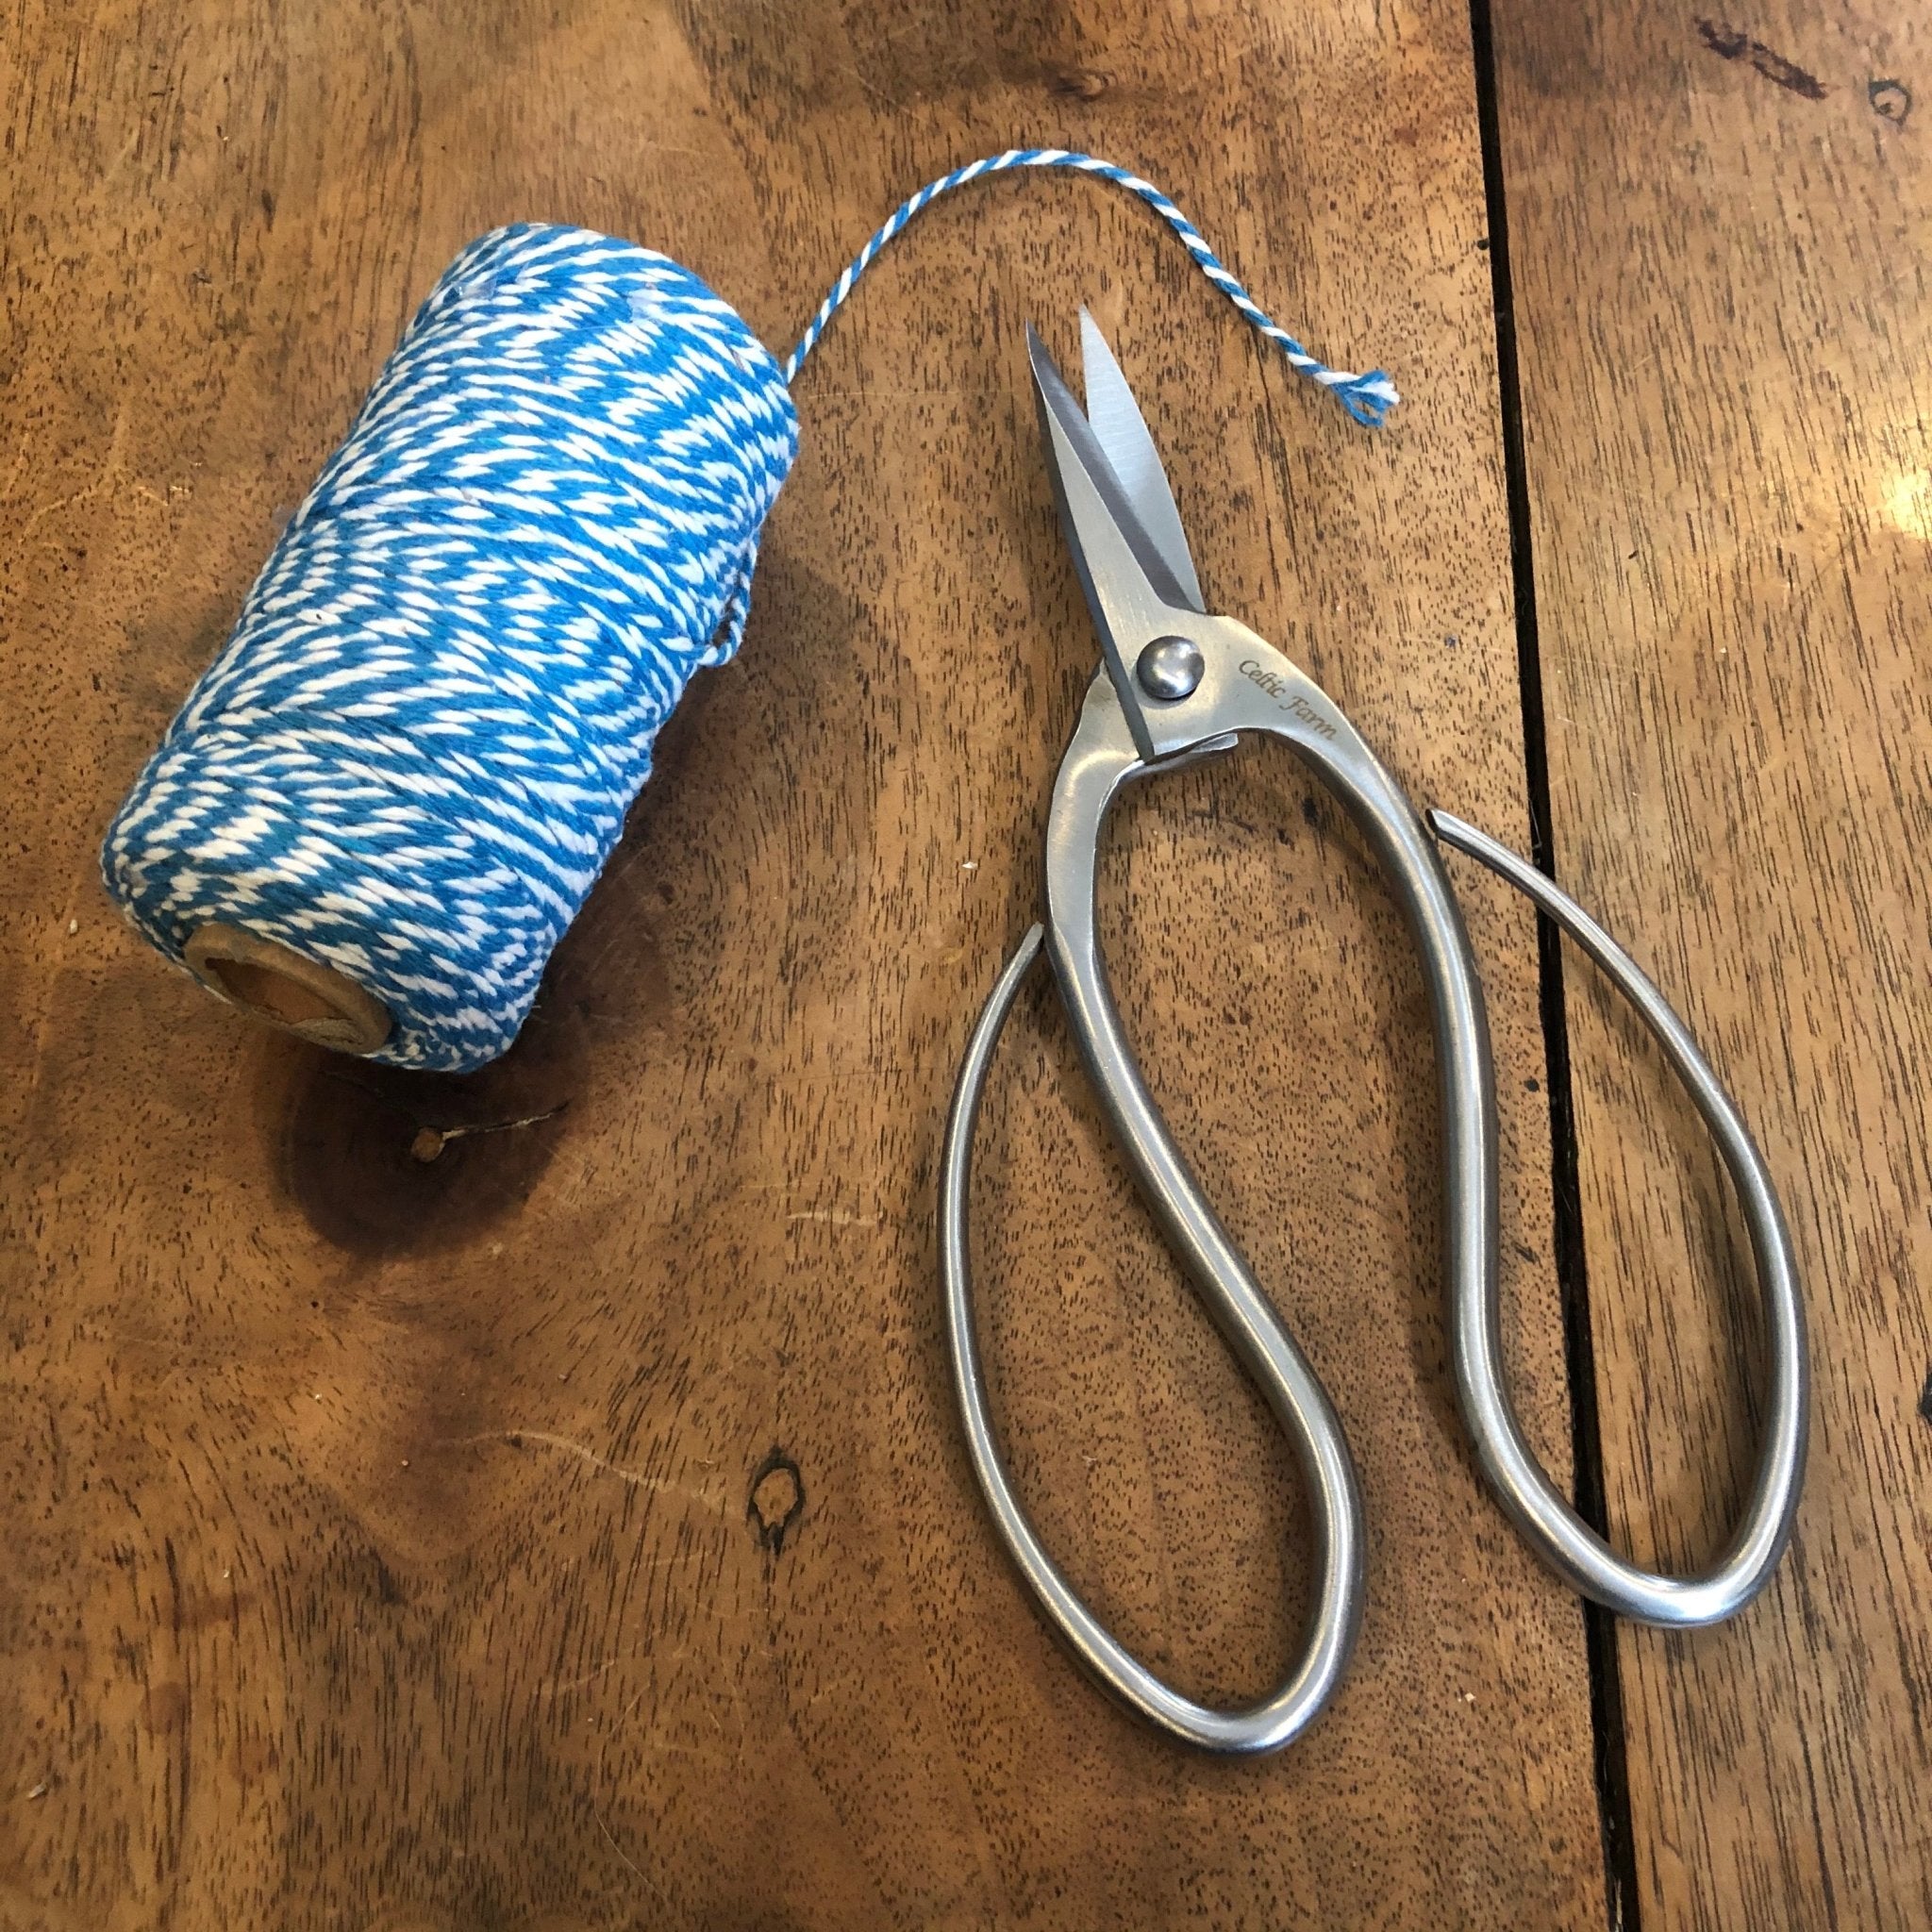 Navy Blue and White Bakers Twine